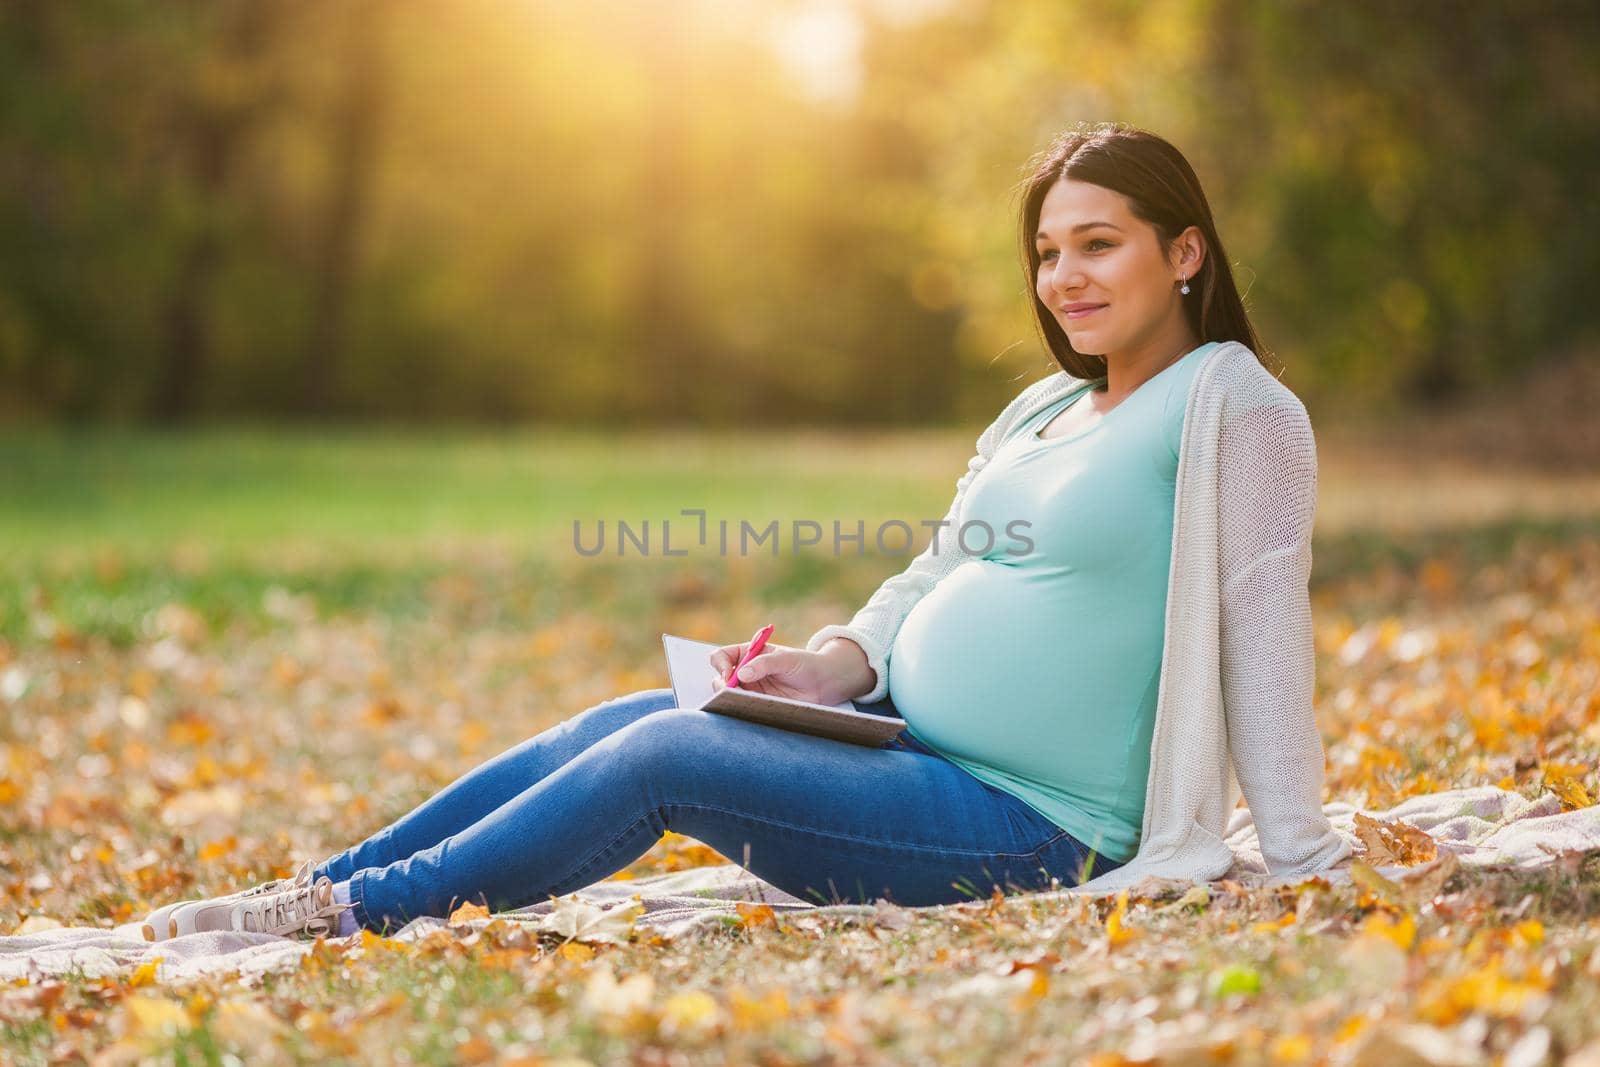 Pregnant woman relaxing in park. She is writing to do list.